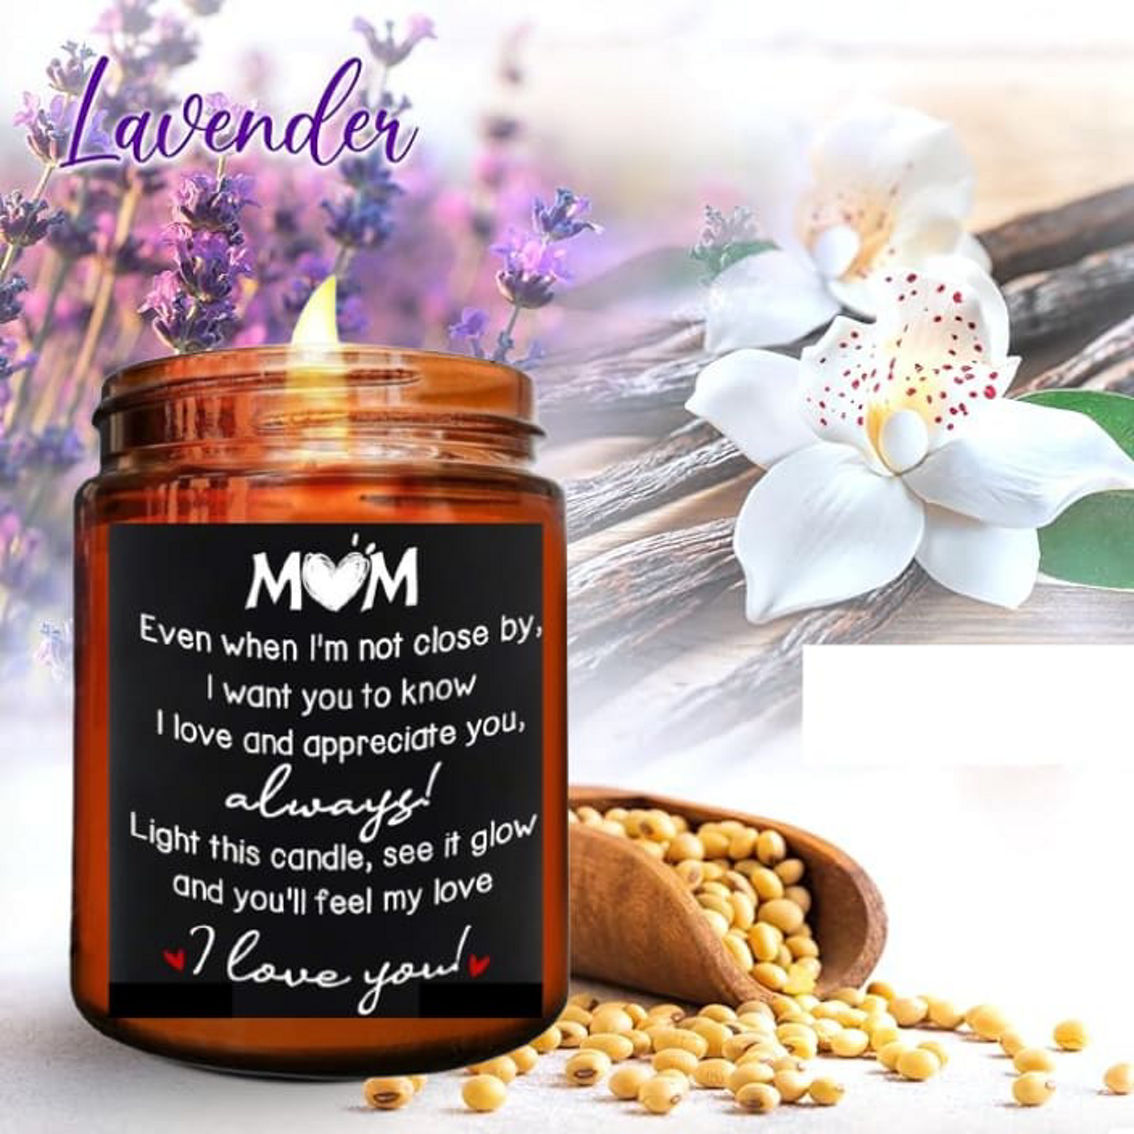 Lovery Mothers Day Lavender Scented Soy Wax Candle , MOM...Always! I Love You! - Image 2 of 5